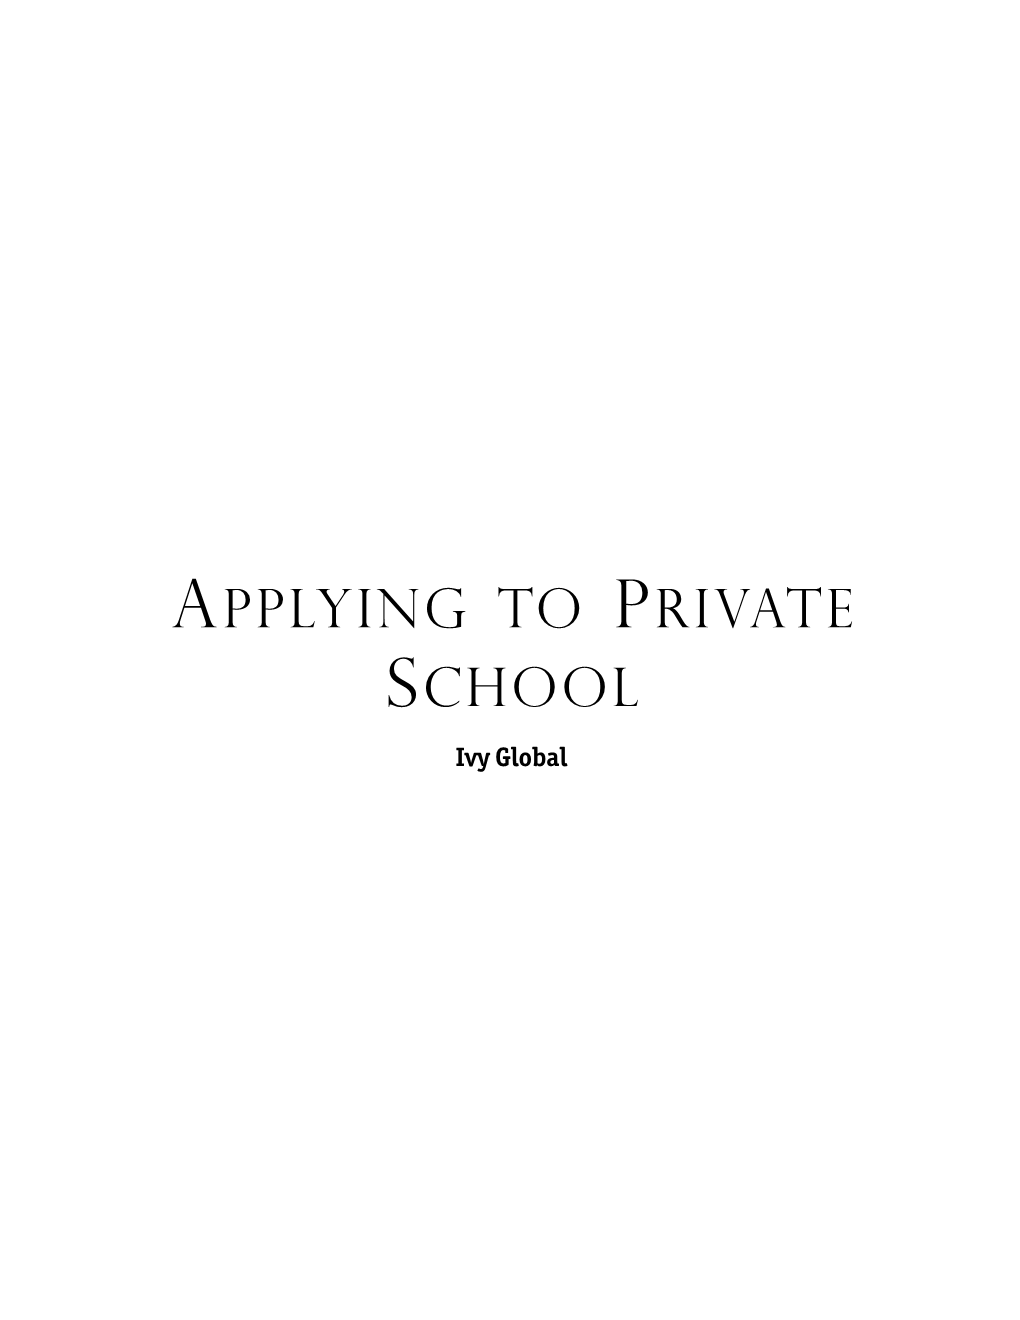 Applying to Private School